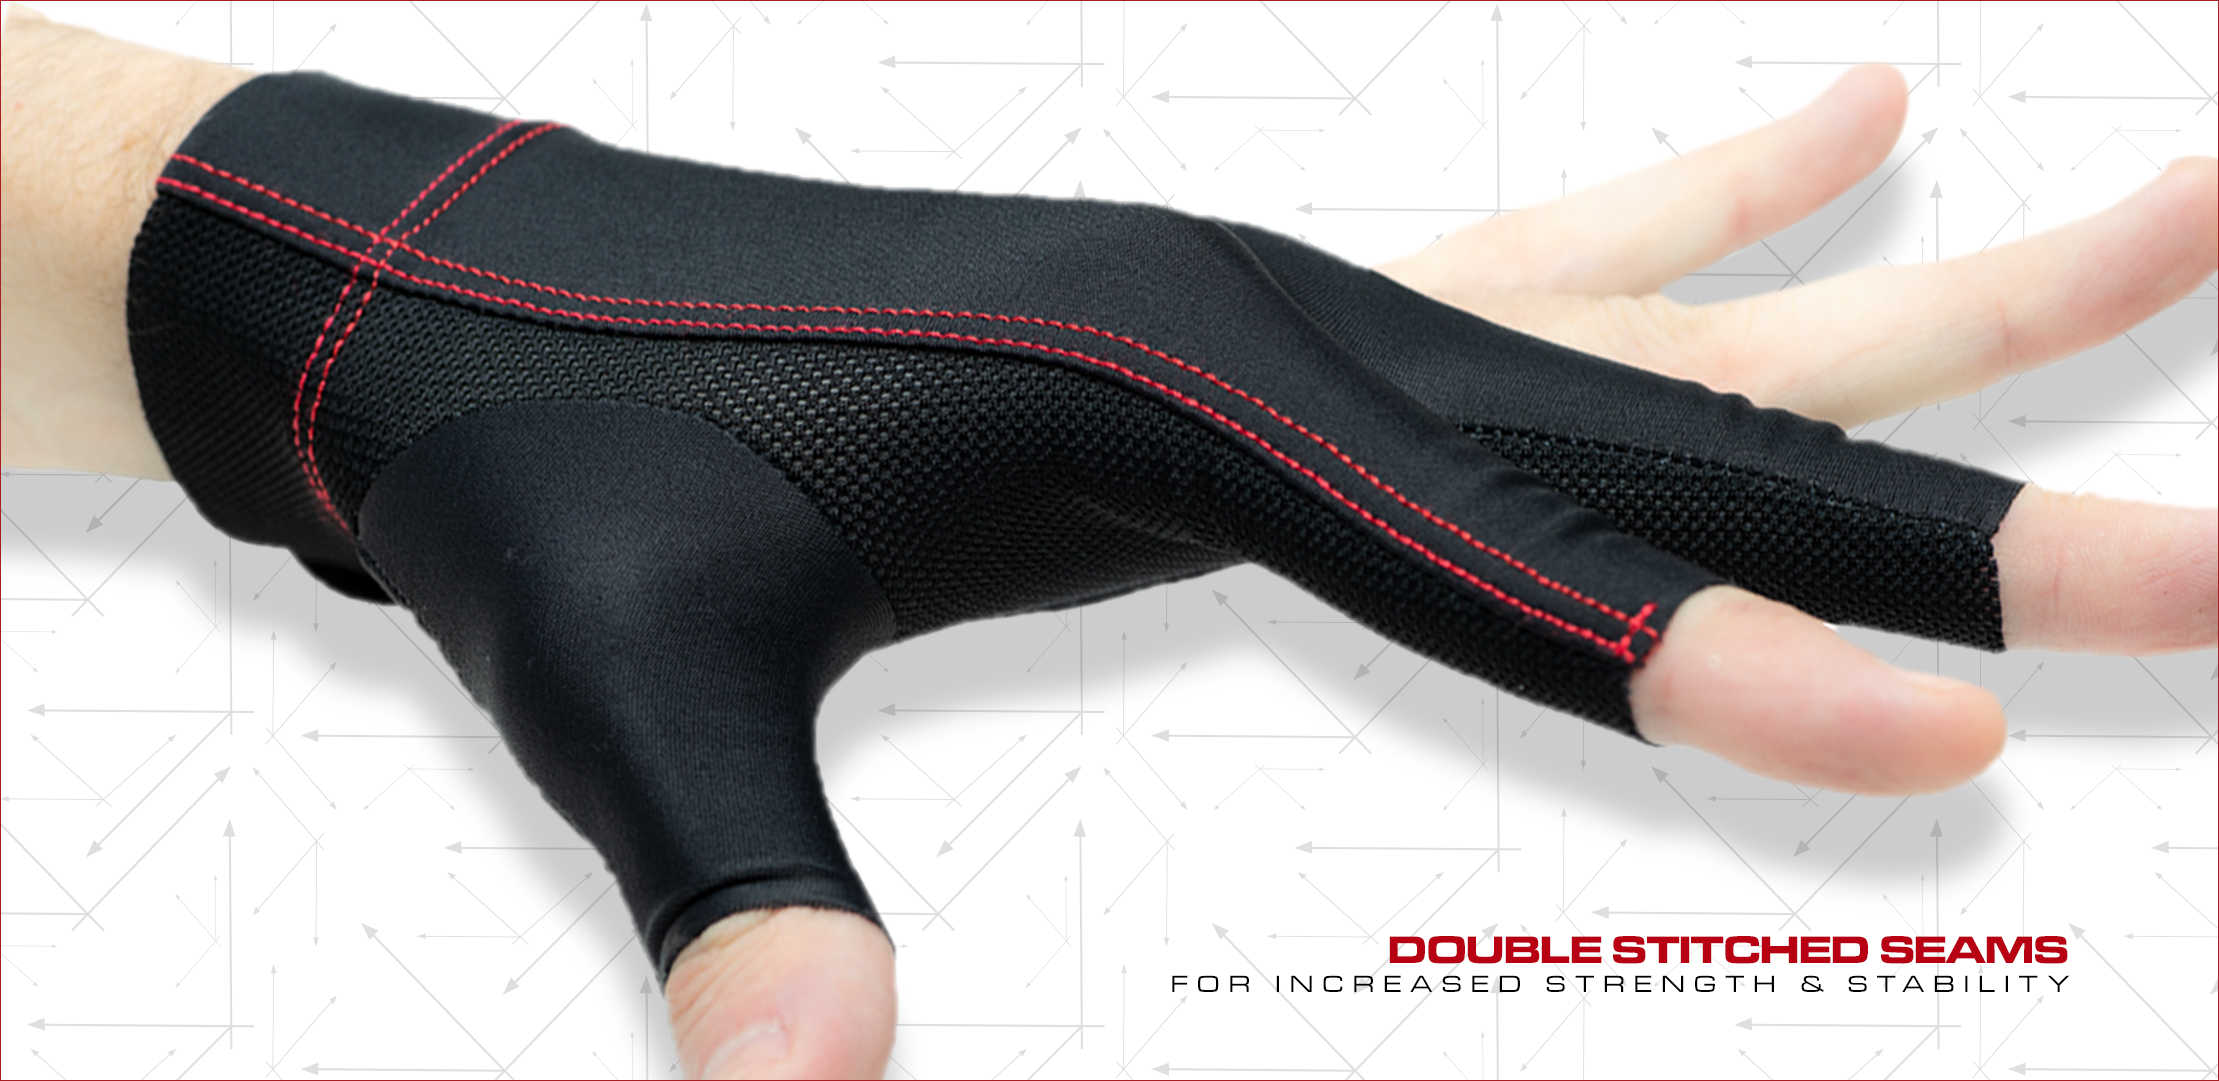 Axis Glove Double Stitched Seams